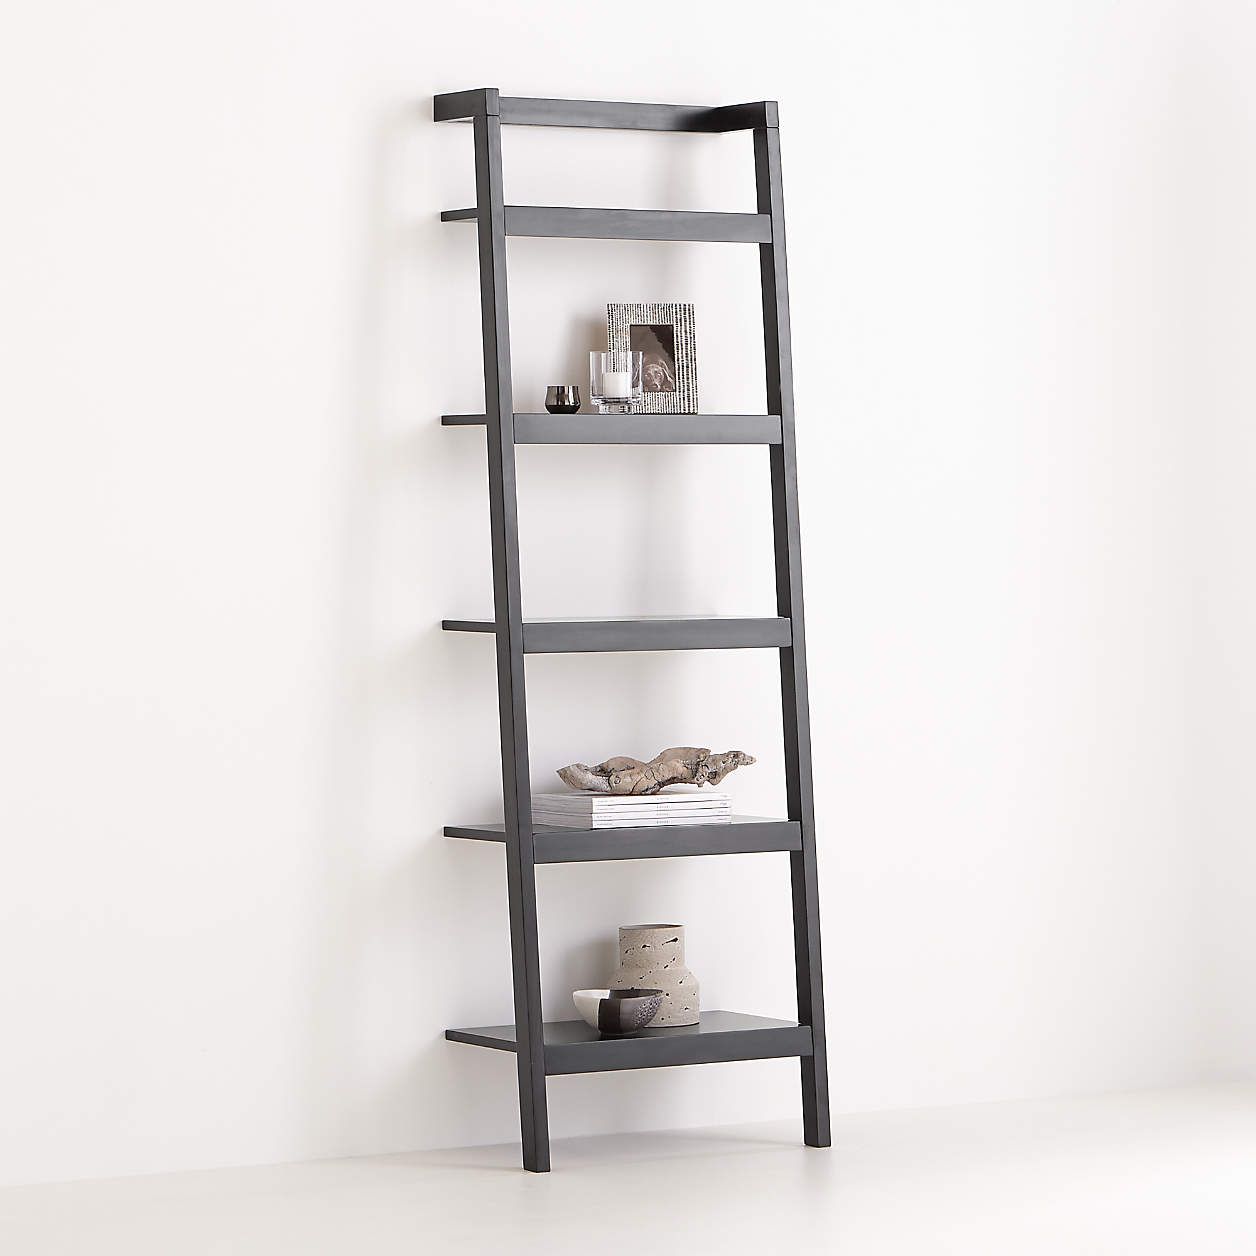 Sawyer White Leaning 24.5" Bookcase + Reviews | Crate and Barrel | Crate & Barrel